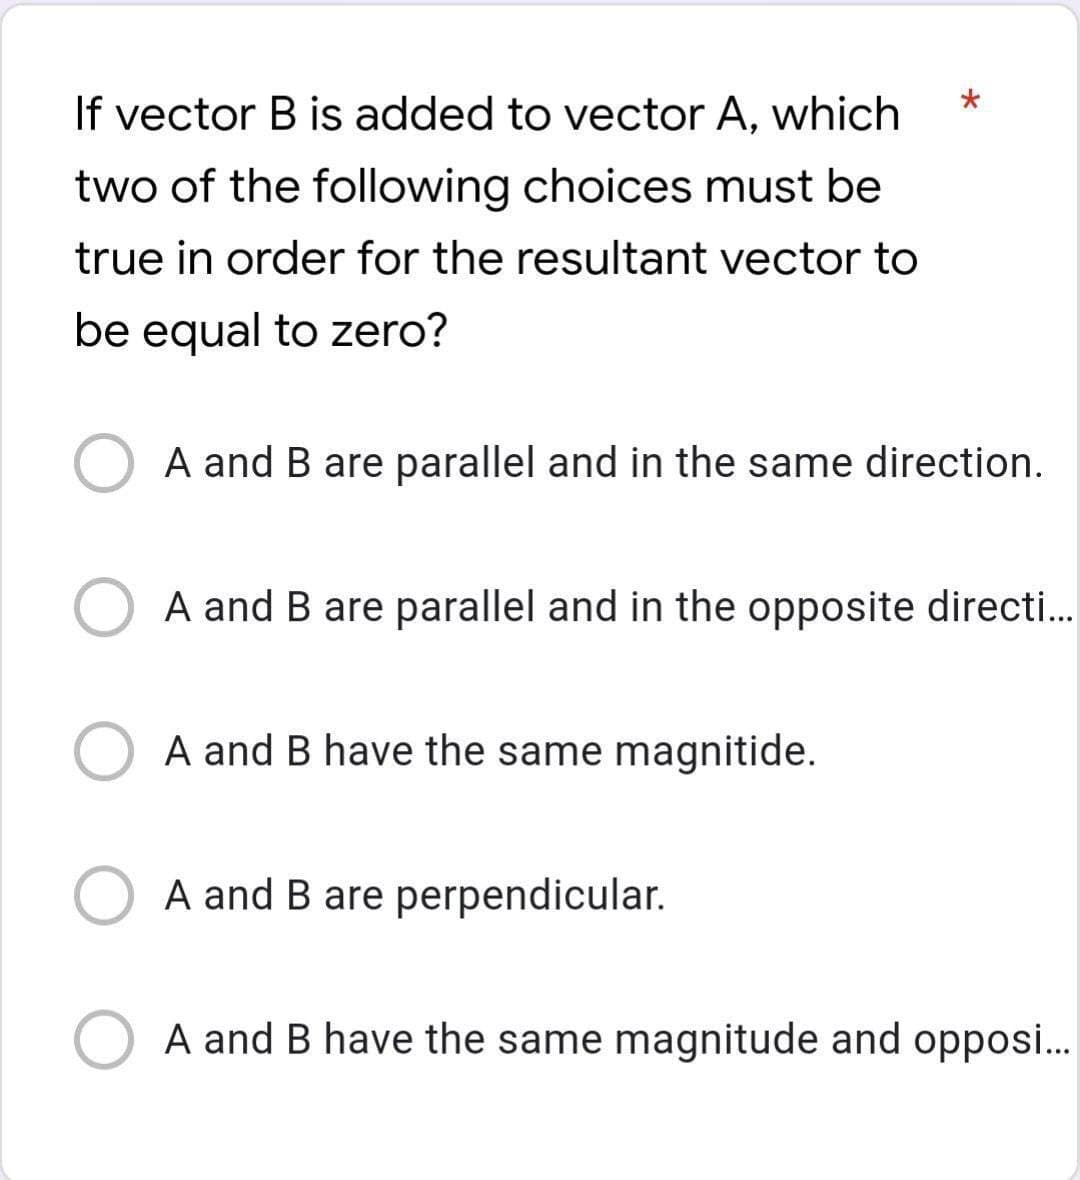 If vector B is added to vector A, which
two of the following choices must be
true in order for the resultant vector to
be equal to zero?
A and B are parallel and in the same direction.
A and B are parallel and in the opposite directi..
A and B have the same magnitide.
A and B are perpendicular.
A and B have the same magnitude and opposi...
